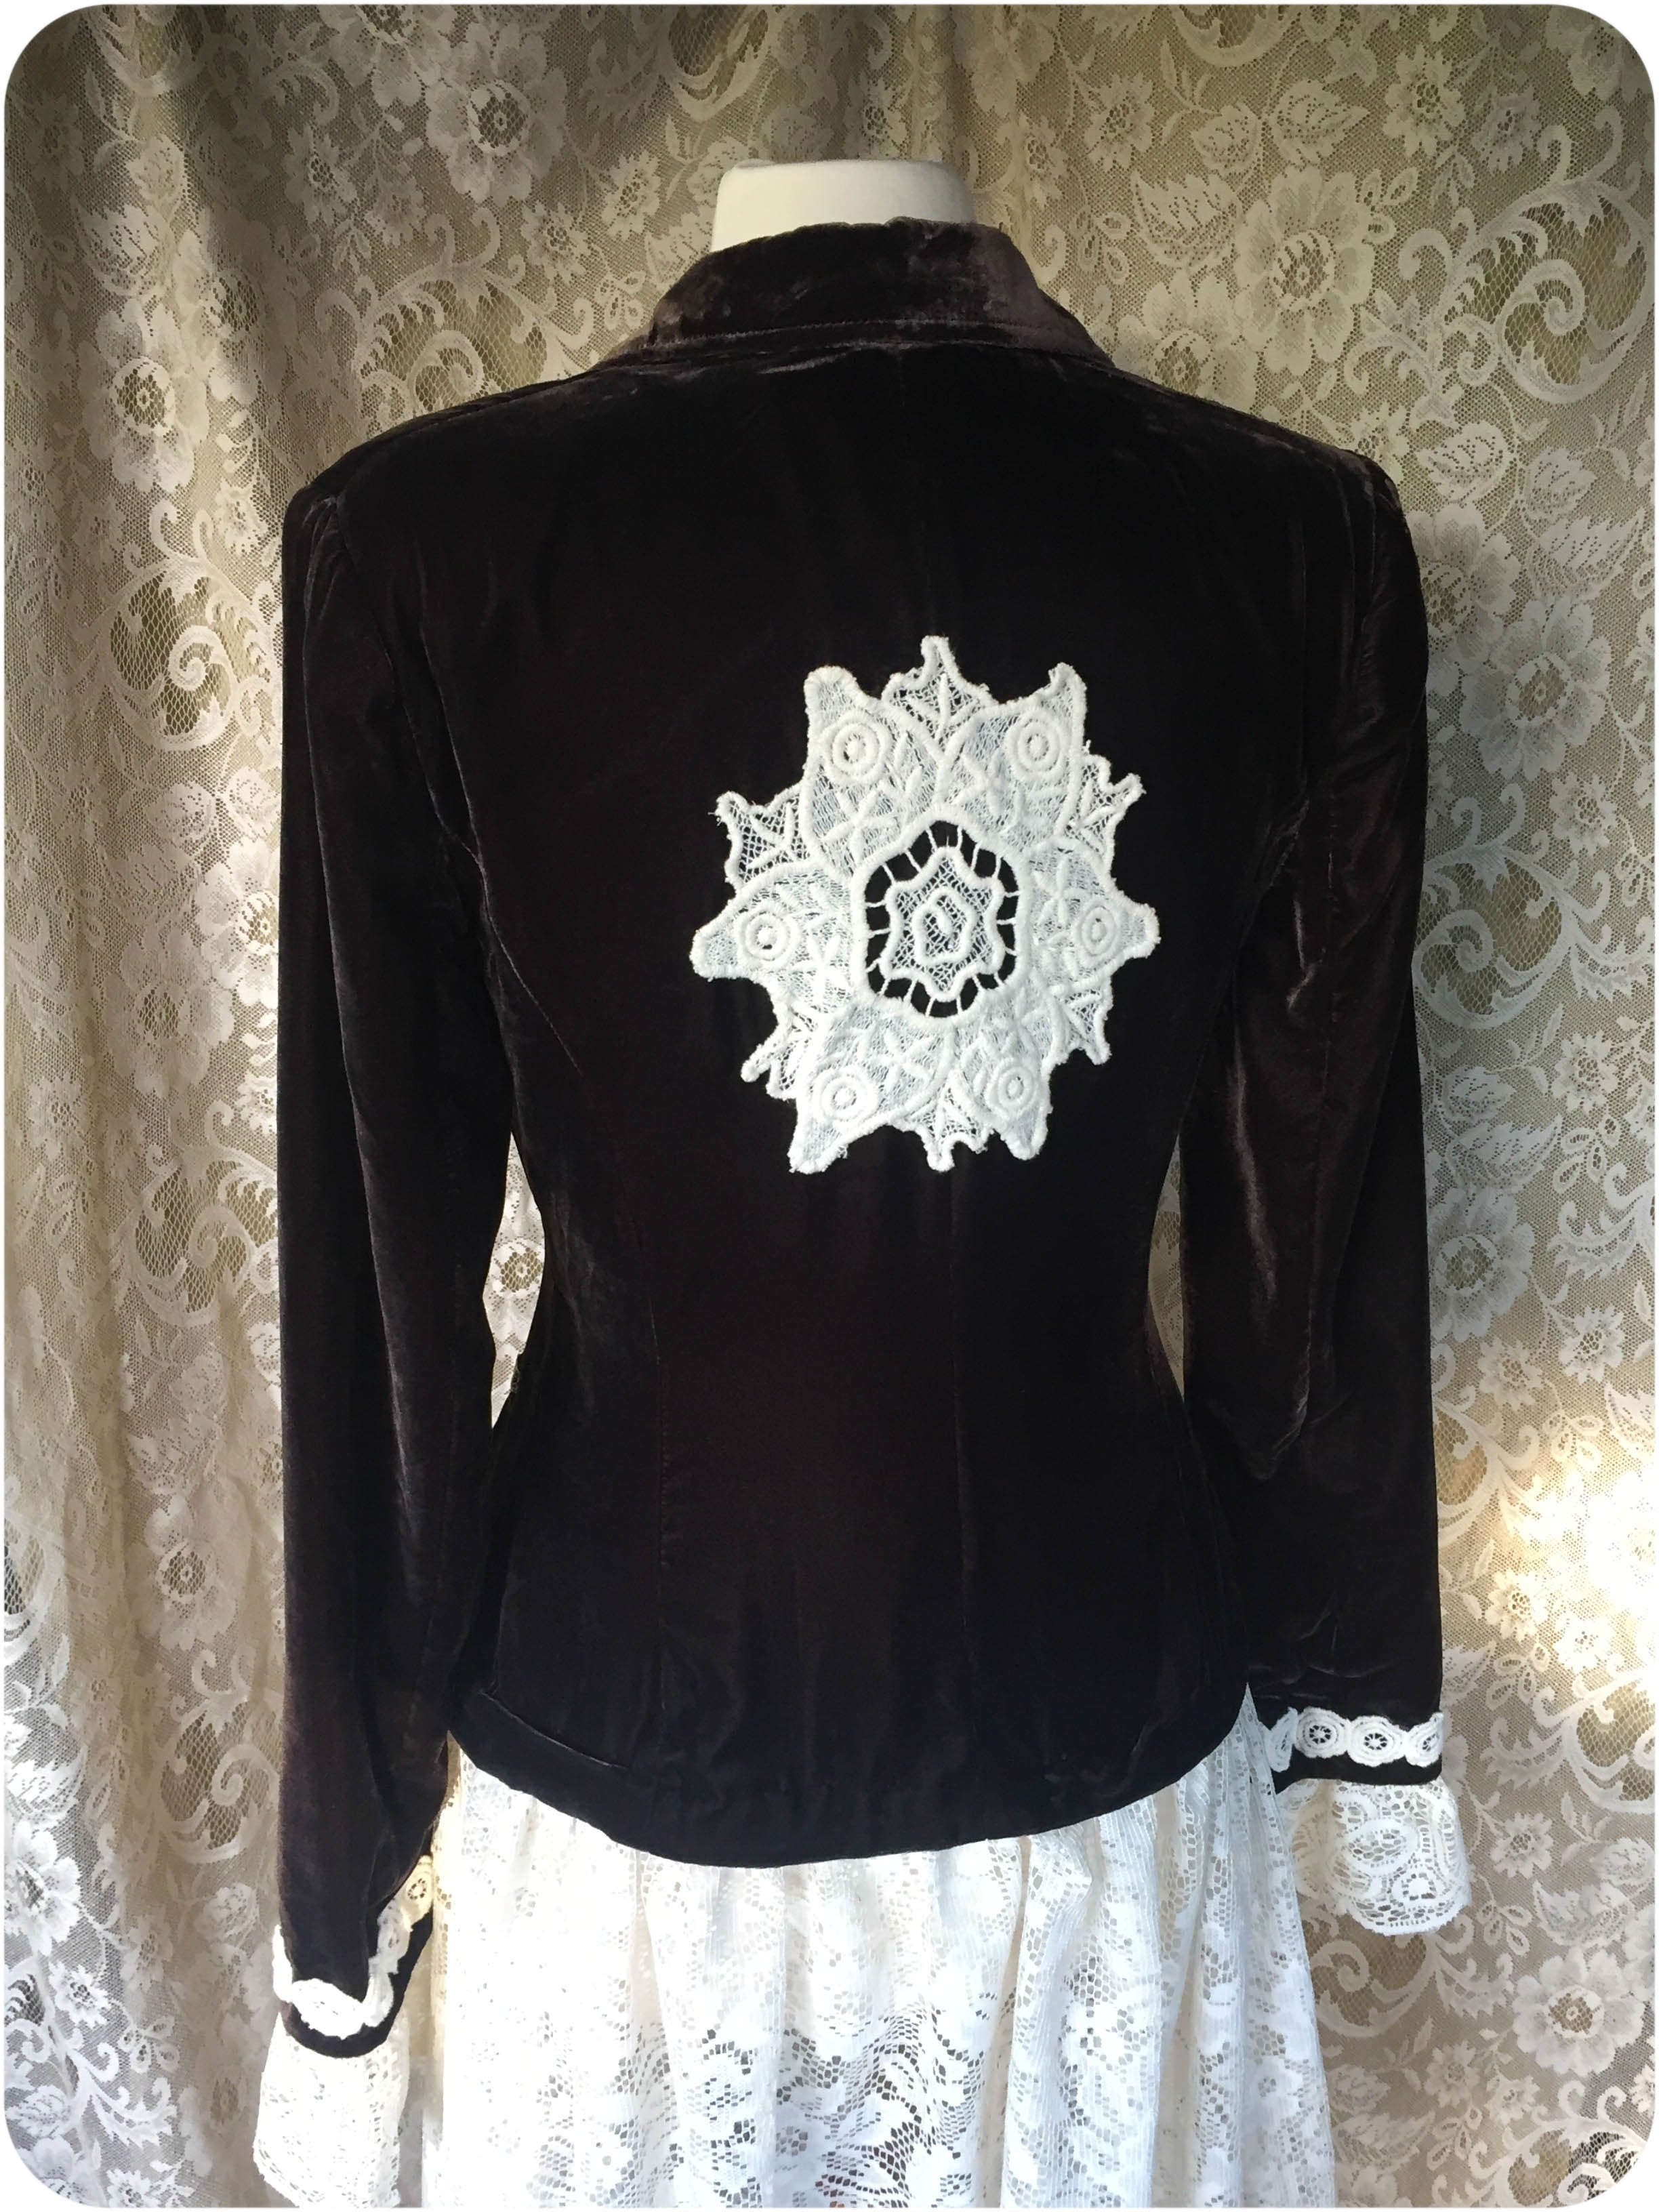 Dark Brown Velvet and Lace Upcycled Victorian Jacket -MEDIUM